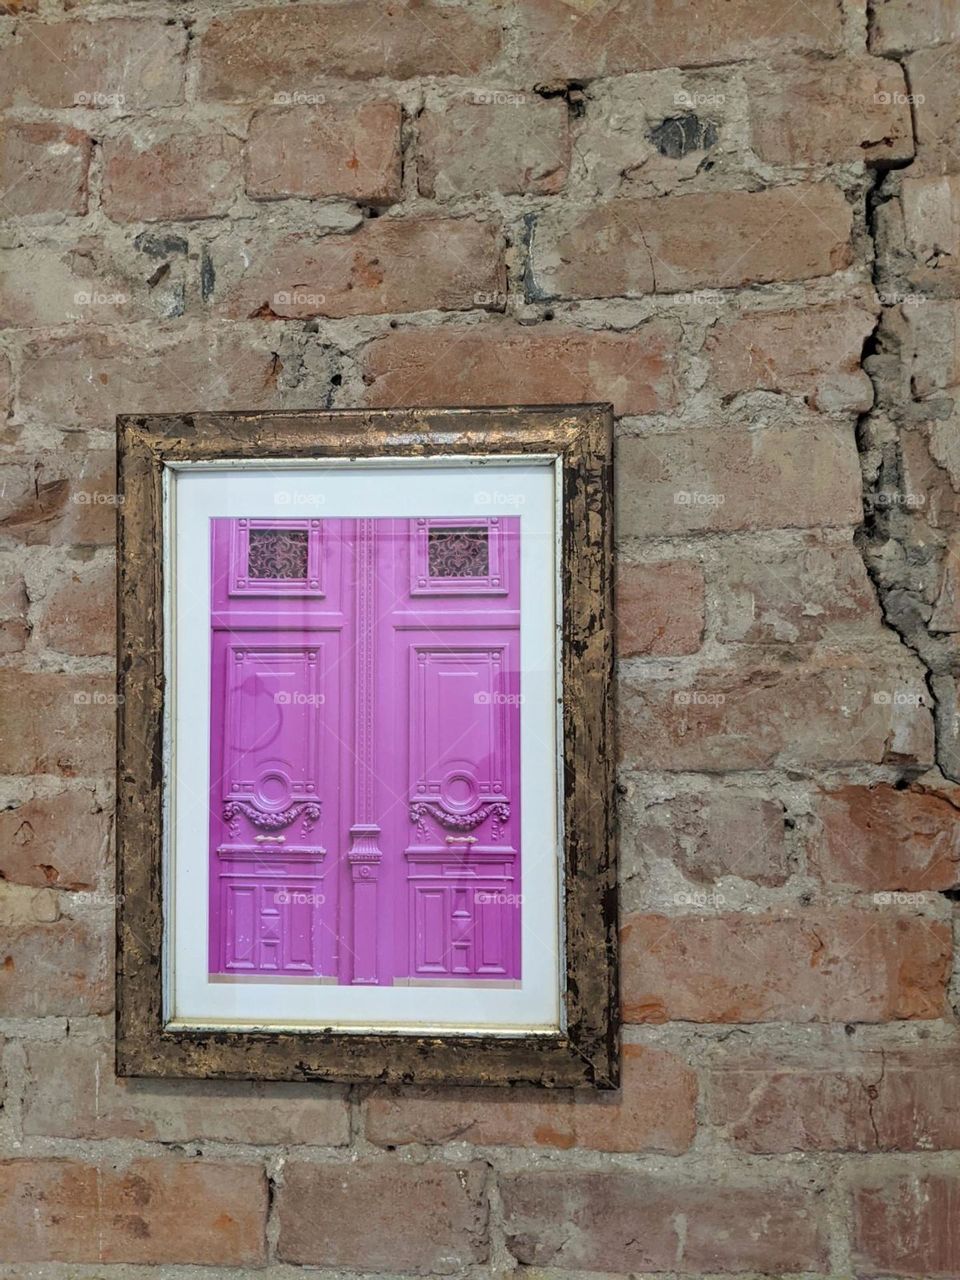 vintage purple door photo in gold frame on a brick interior wall, cracked vintage brick wall, cafe wall decor